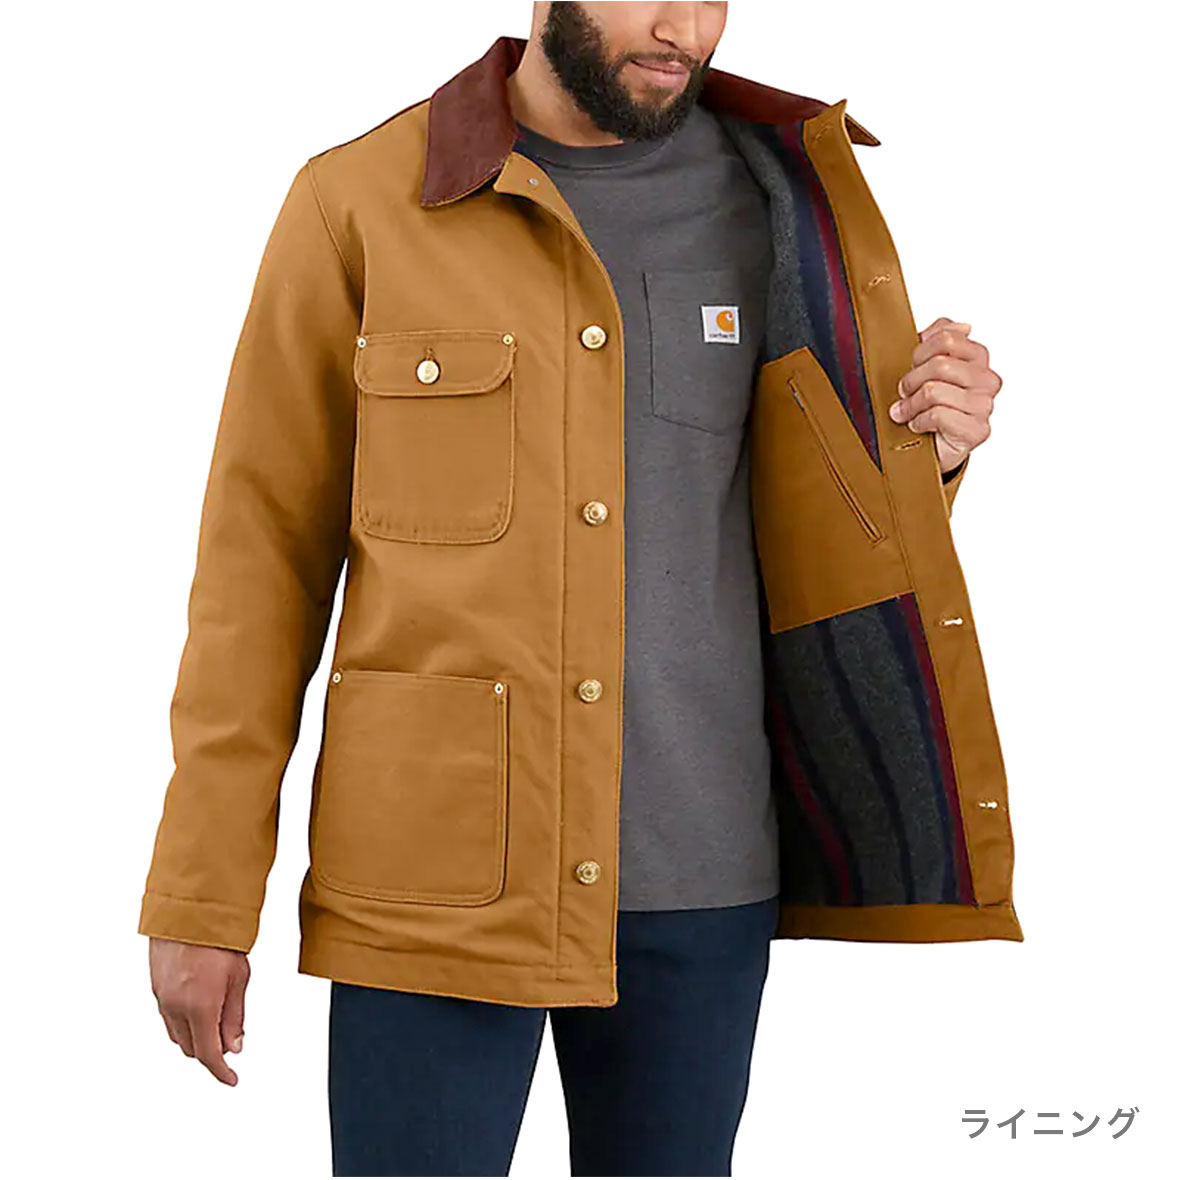 Carhartt カーハート Loose Fit Firm Duck Blanket-Lined Chore Coat (品番103825US)